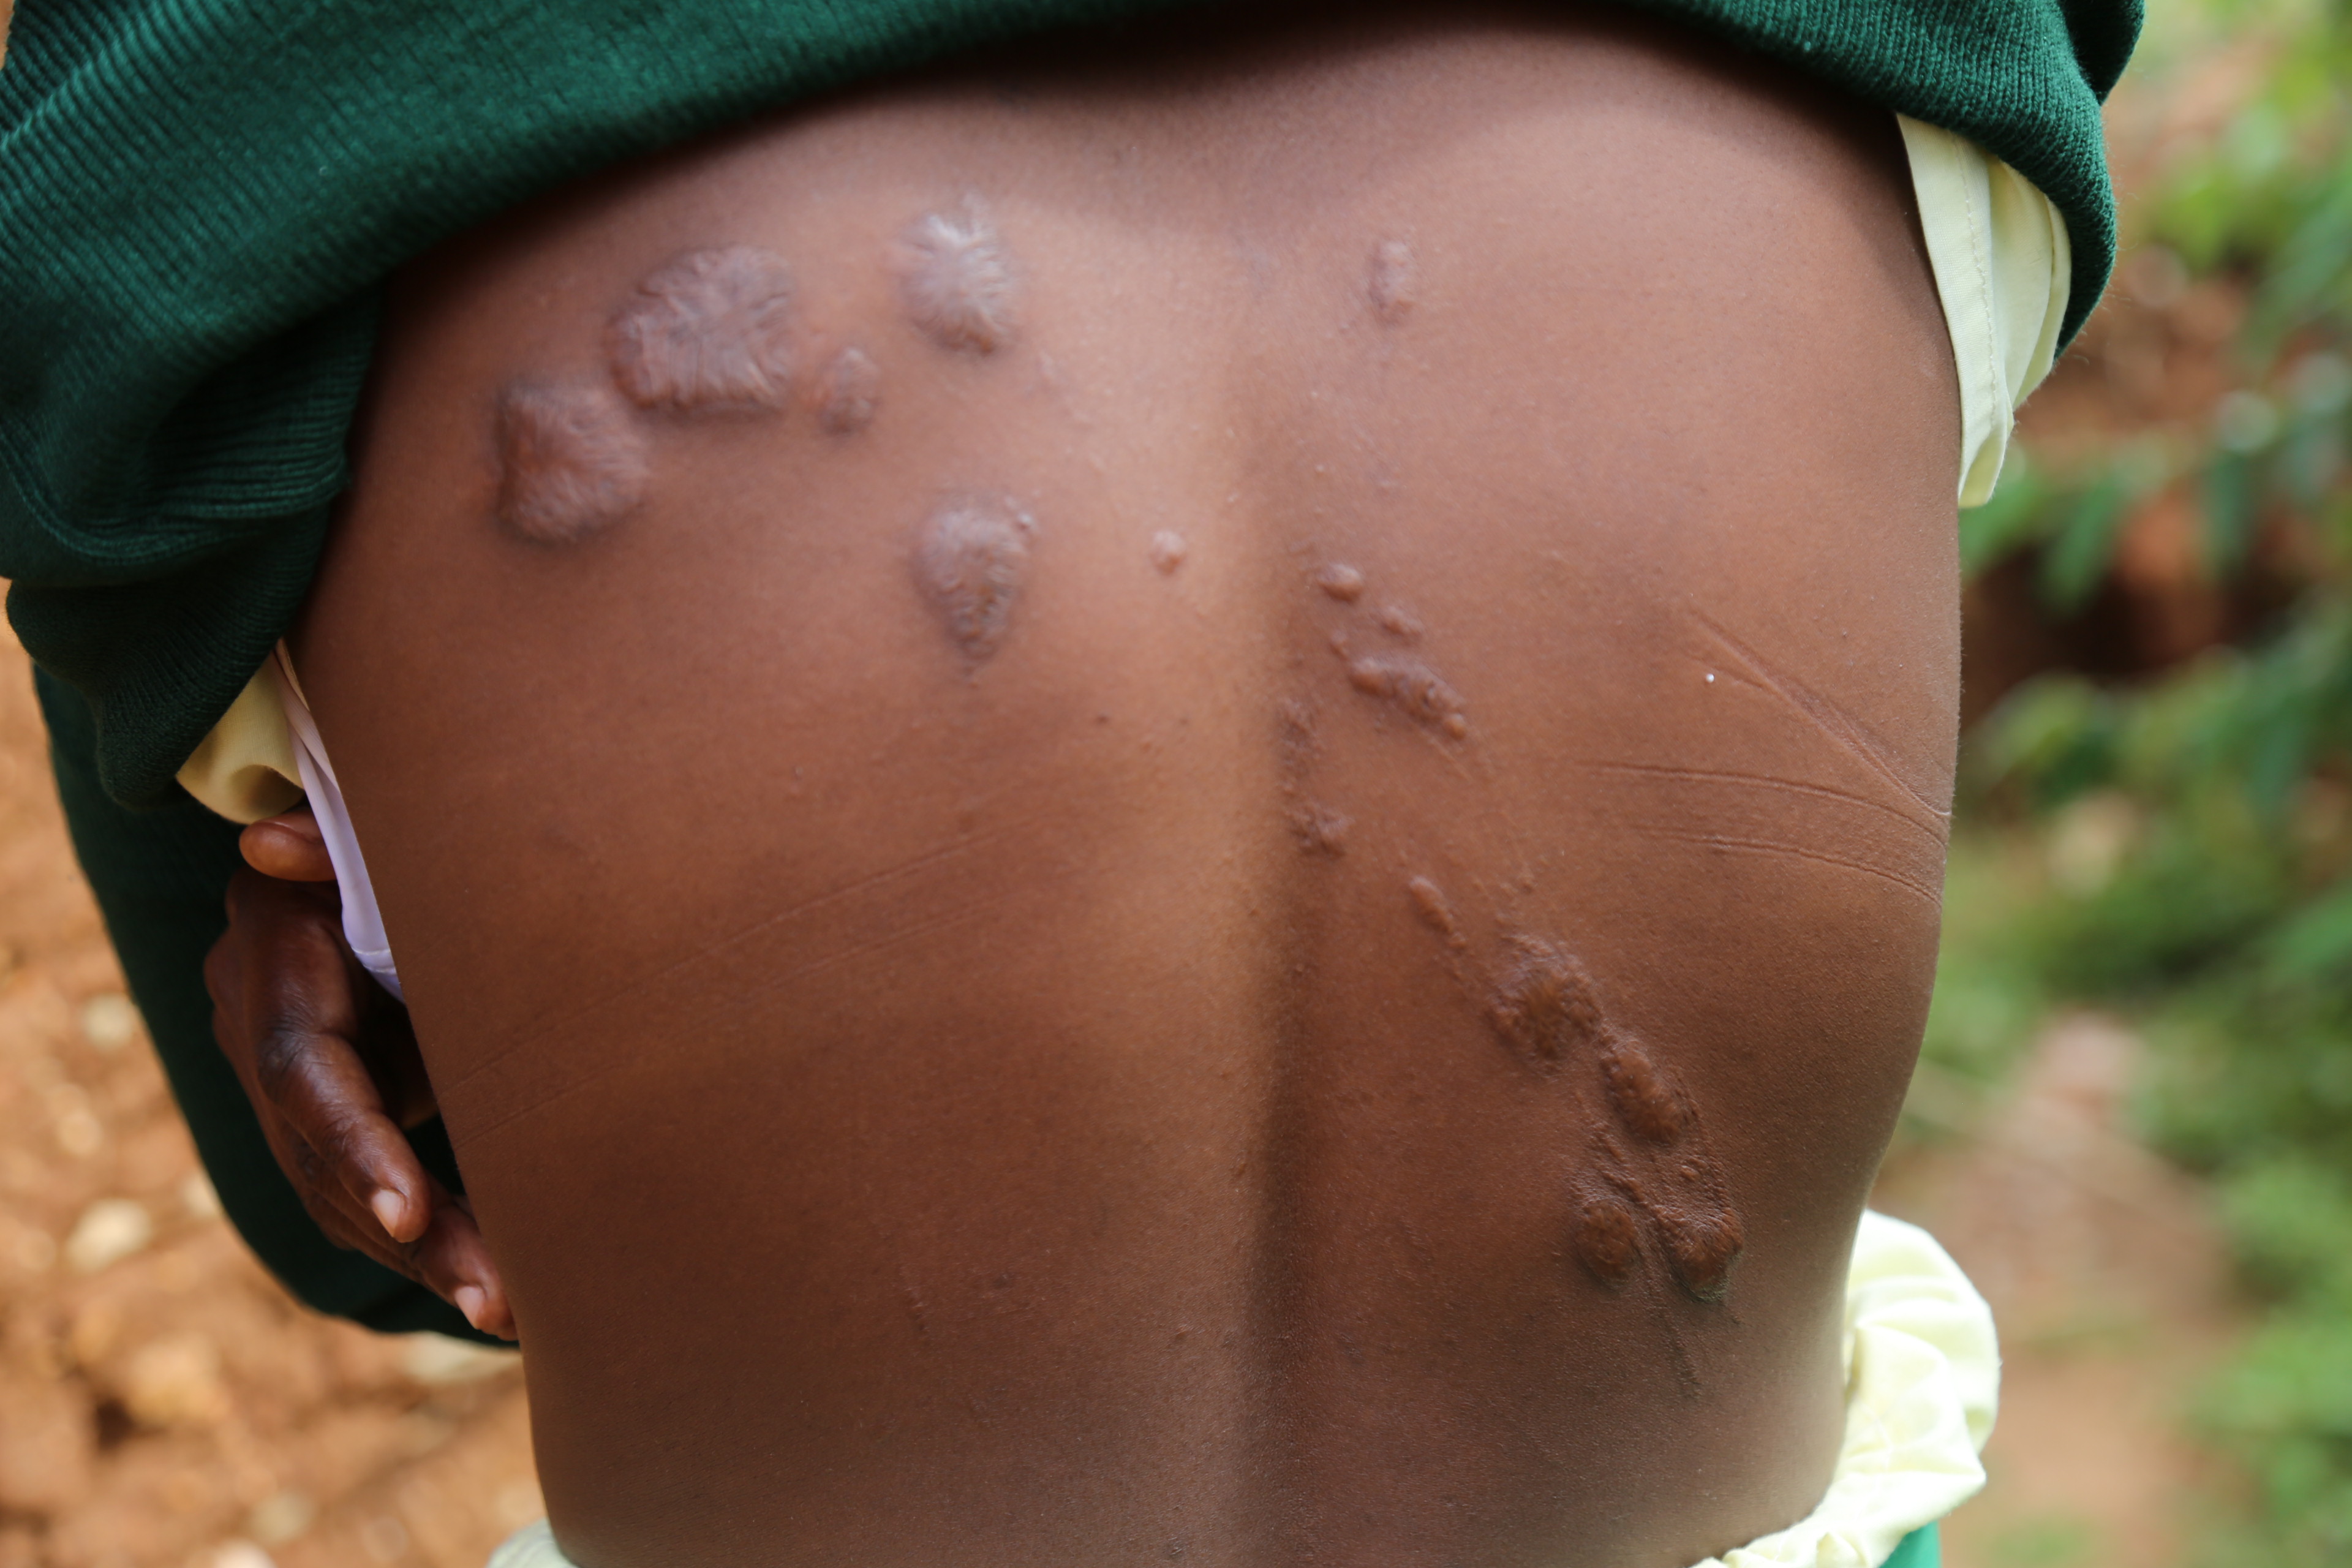 Chebet’s back was scarred by the severe beating she received.